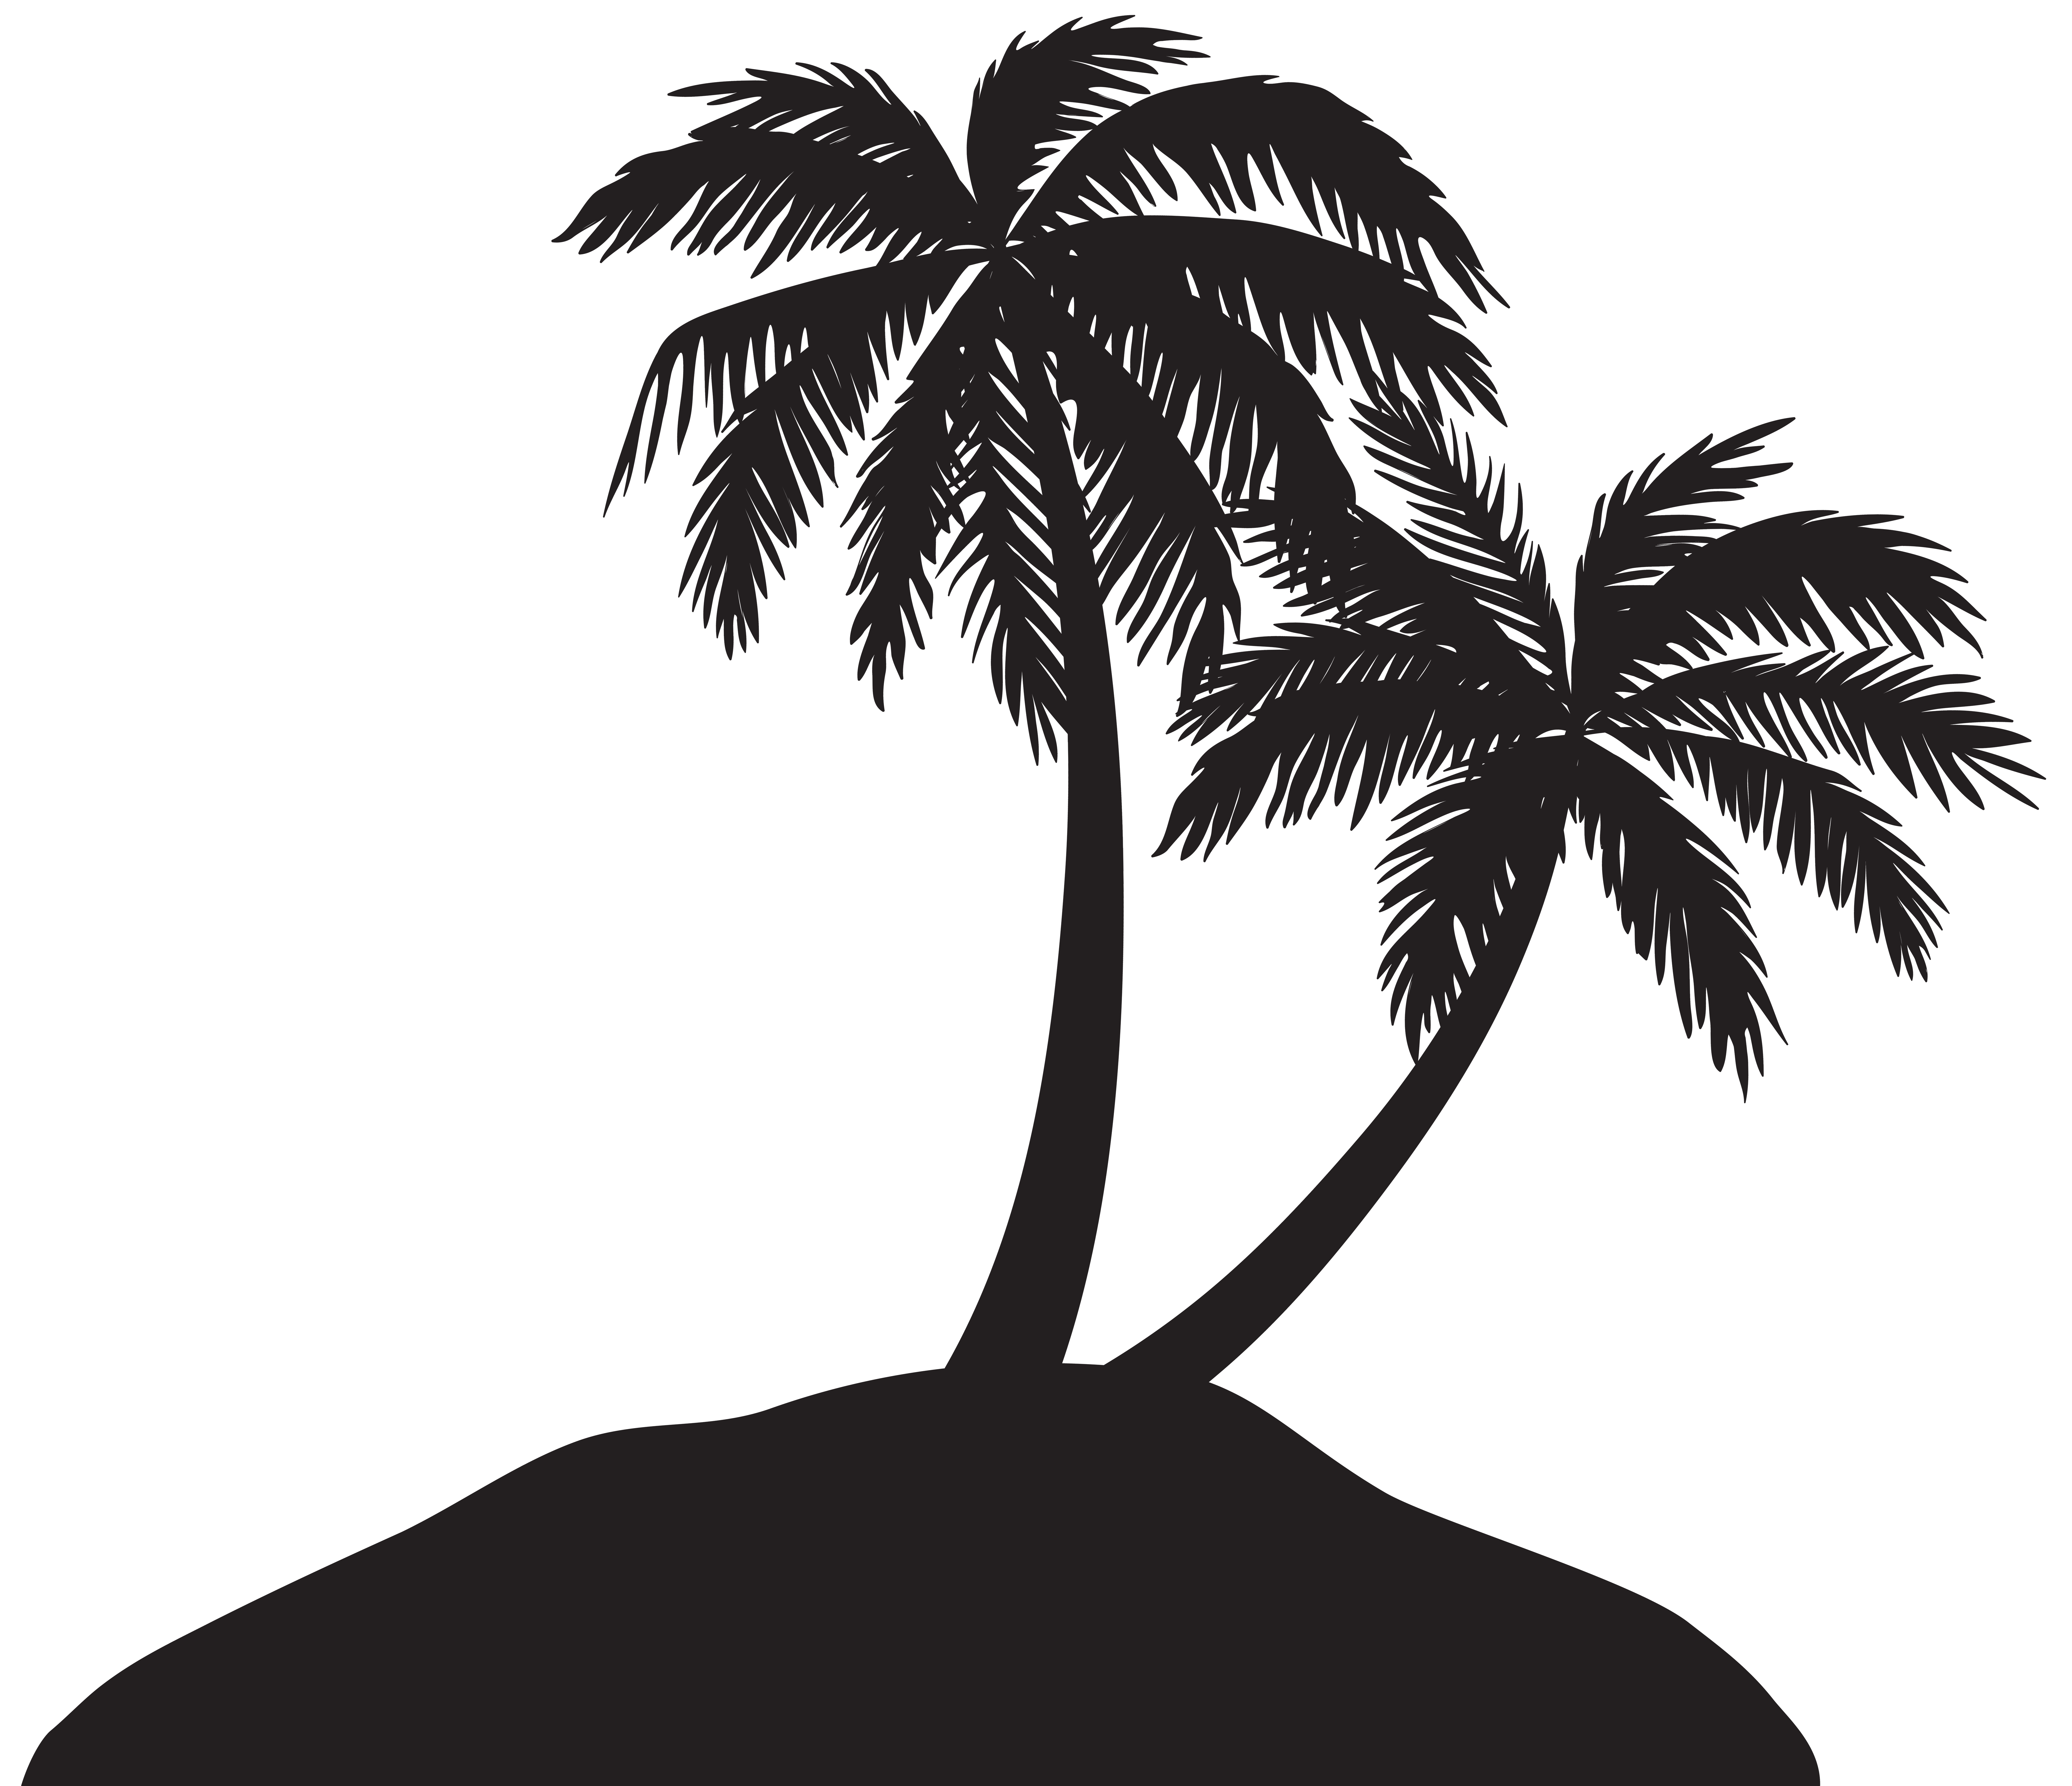 Desert clipart silhouette. Island with palm trees